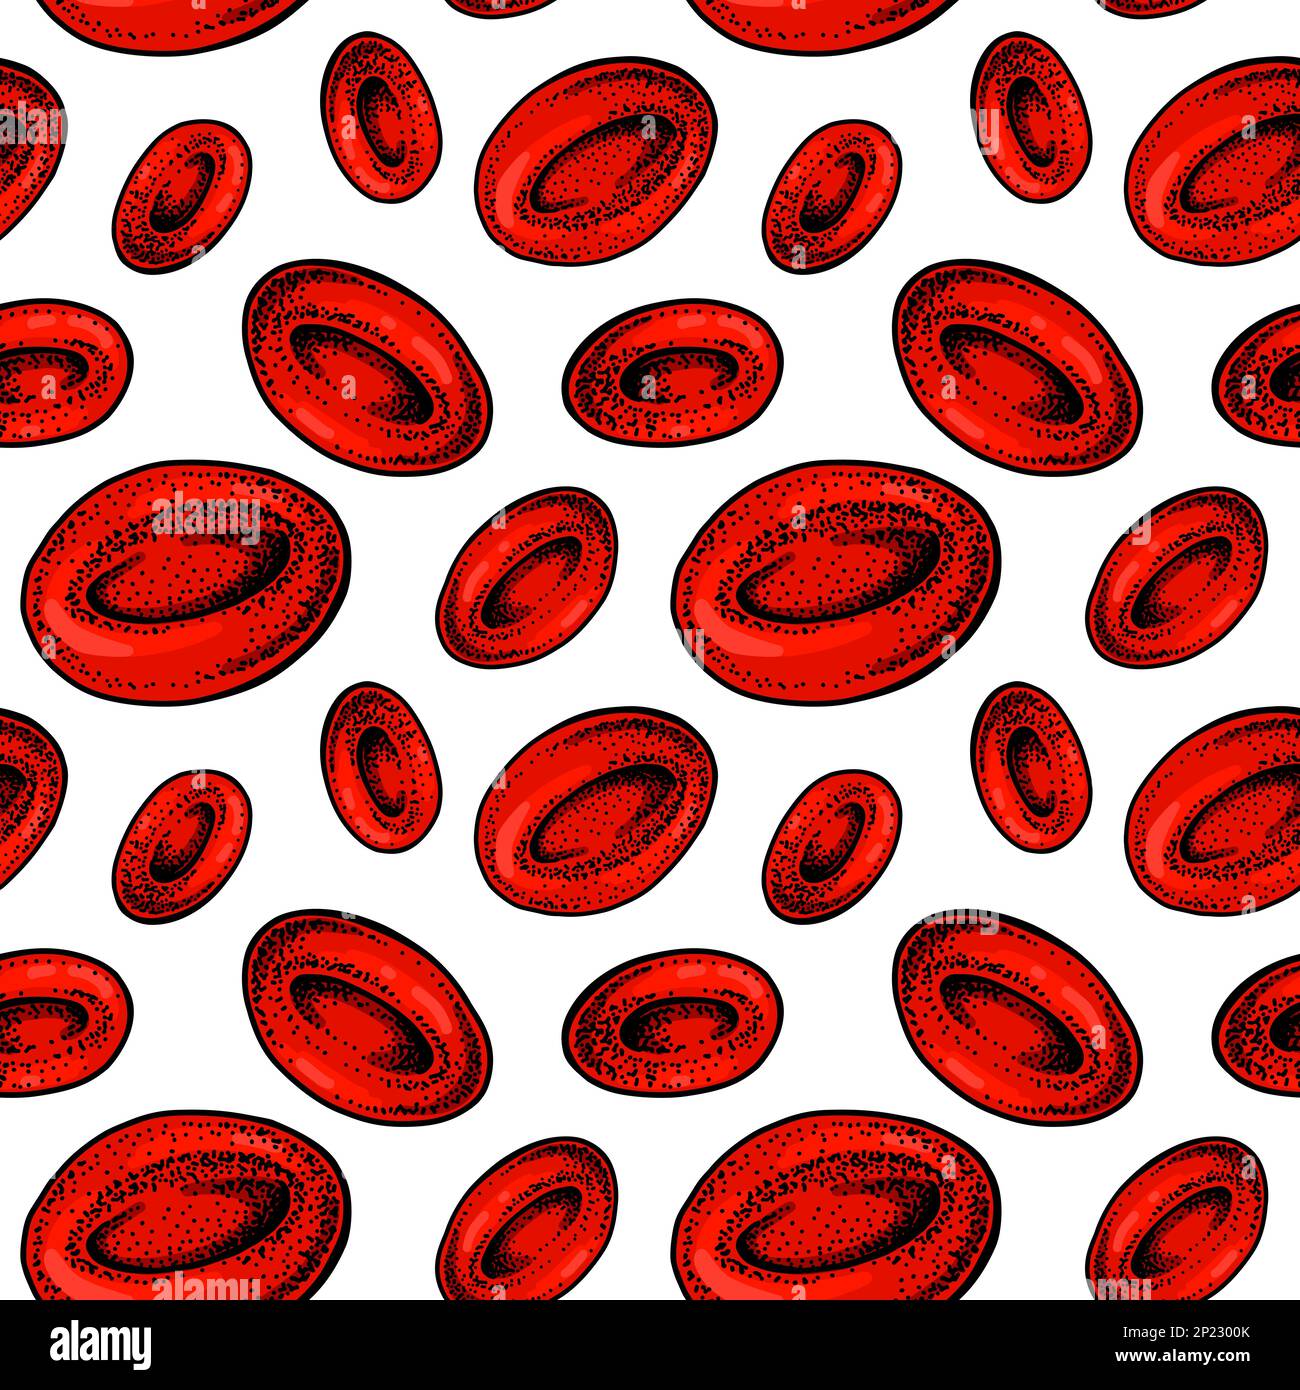 Red Blood cells seamless pattern. Hand drawn erythrocytes. Scientific biology illustration in sketch style Stock Vector